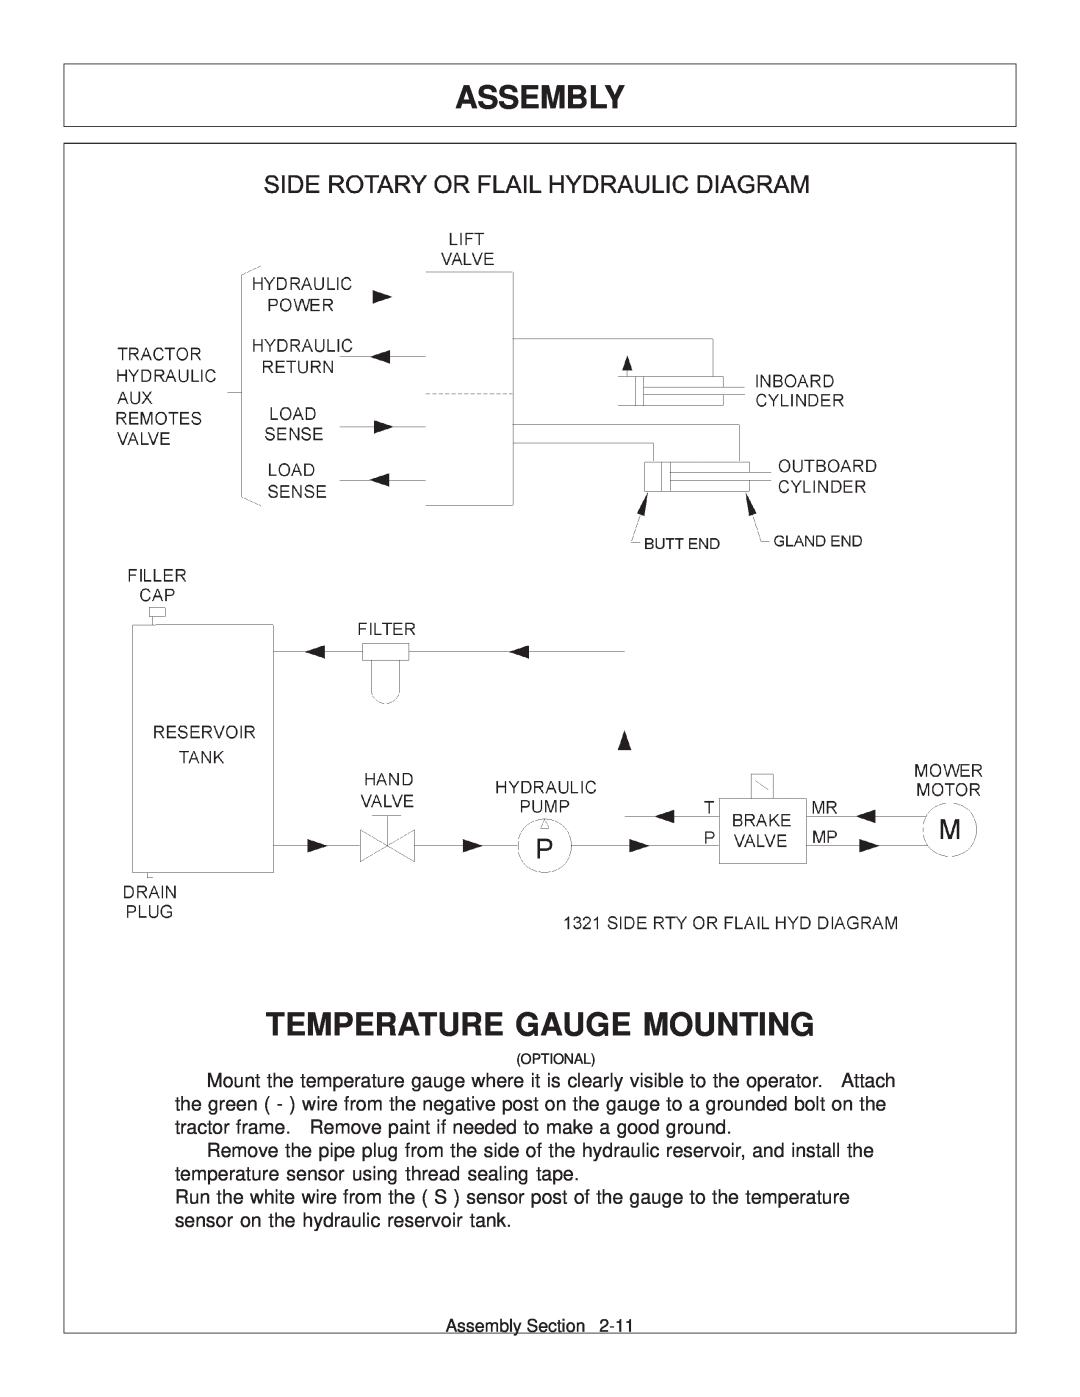 Tiger Products Co., Ltd TS 100A manual Temperature Gauge Mounting, Assembly, Optional 